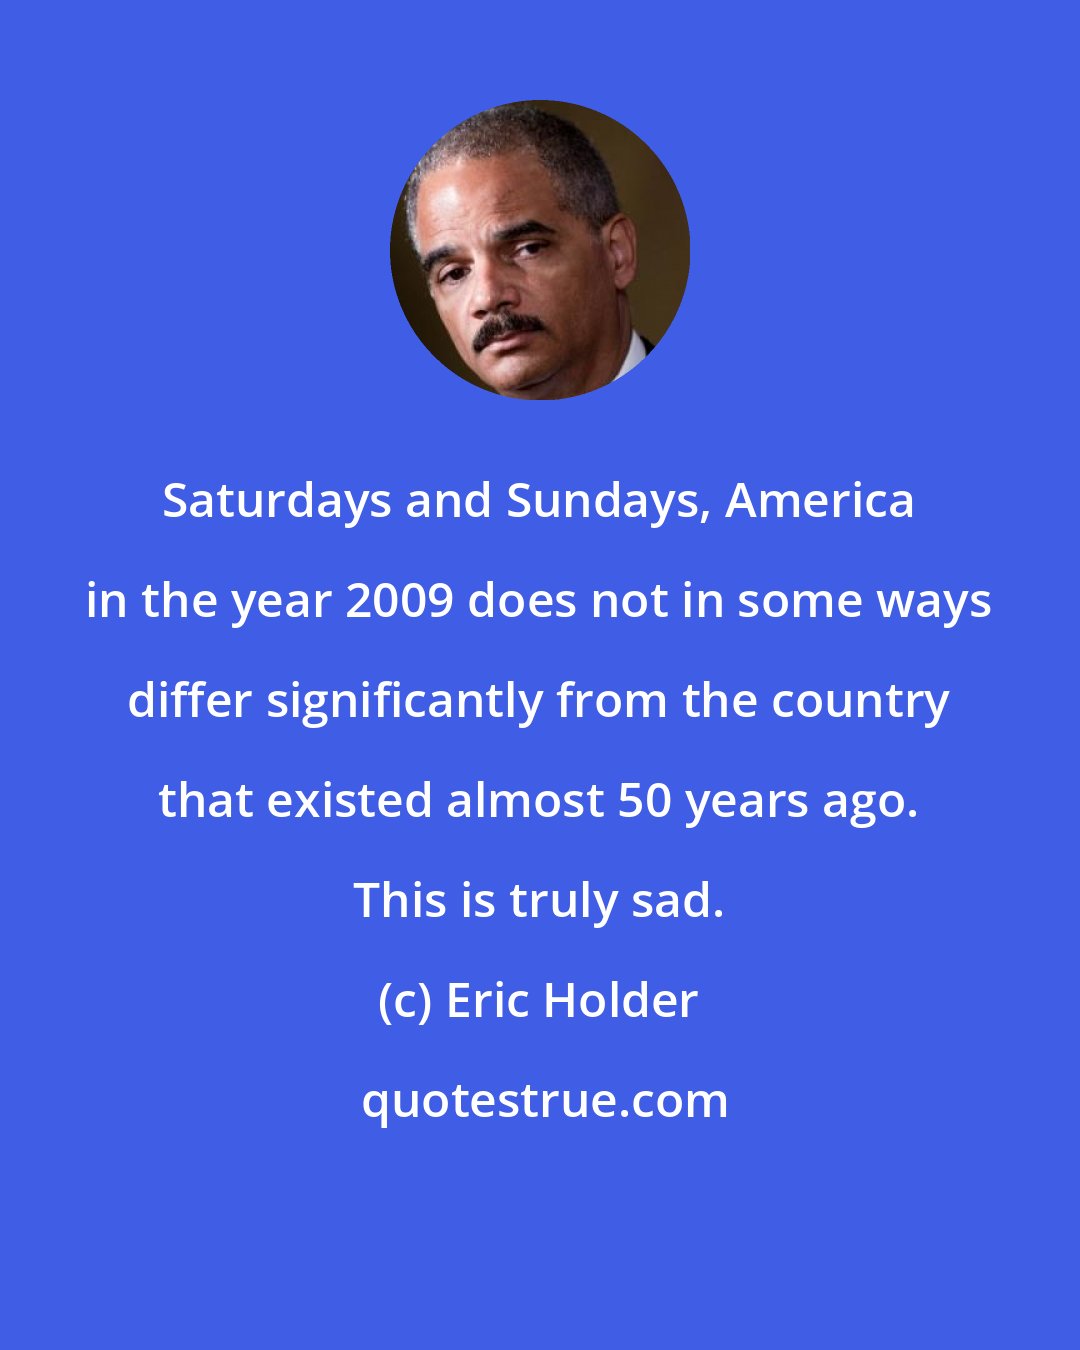 Eric Holder: Saturdays and Sundays, America in the year 2009 does not in some ways differ significantly from the country that existed almost 50 years ago. This is truly sad.